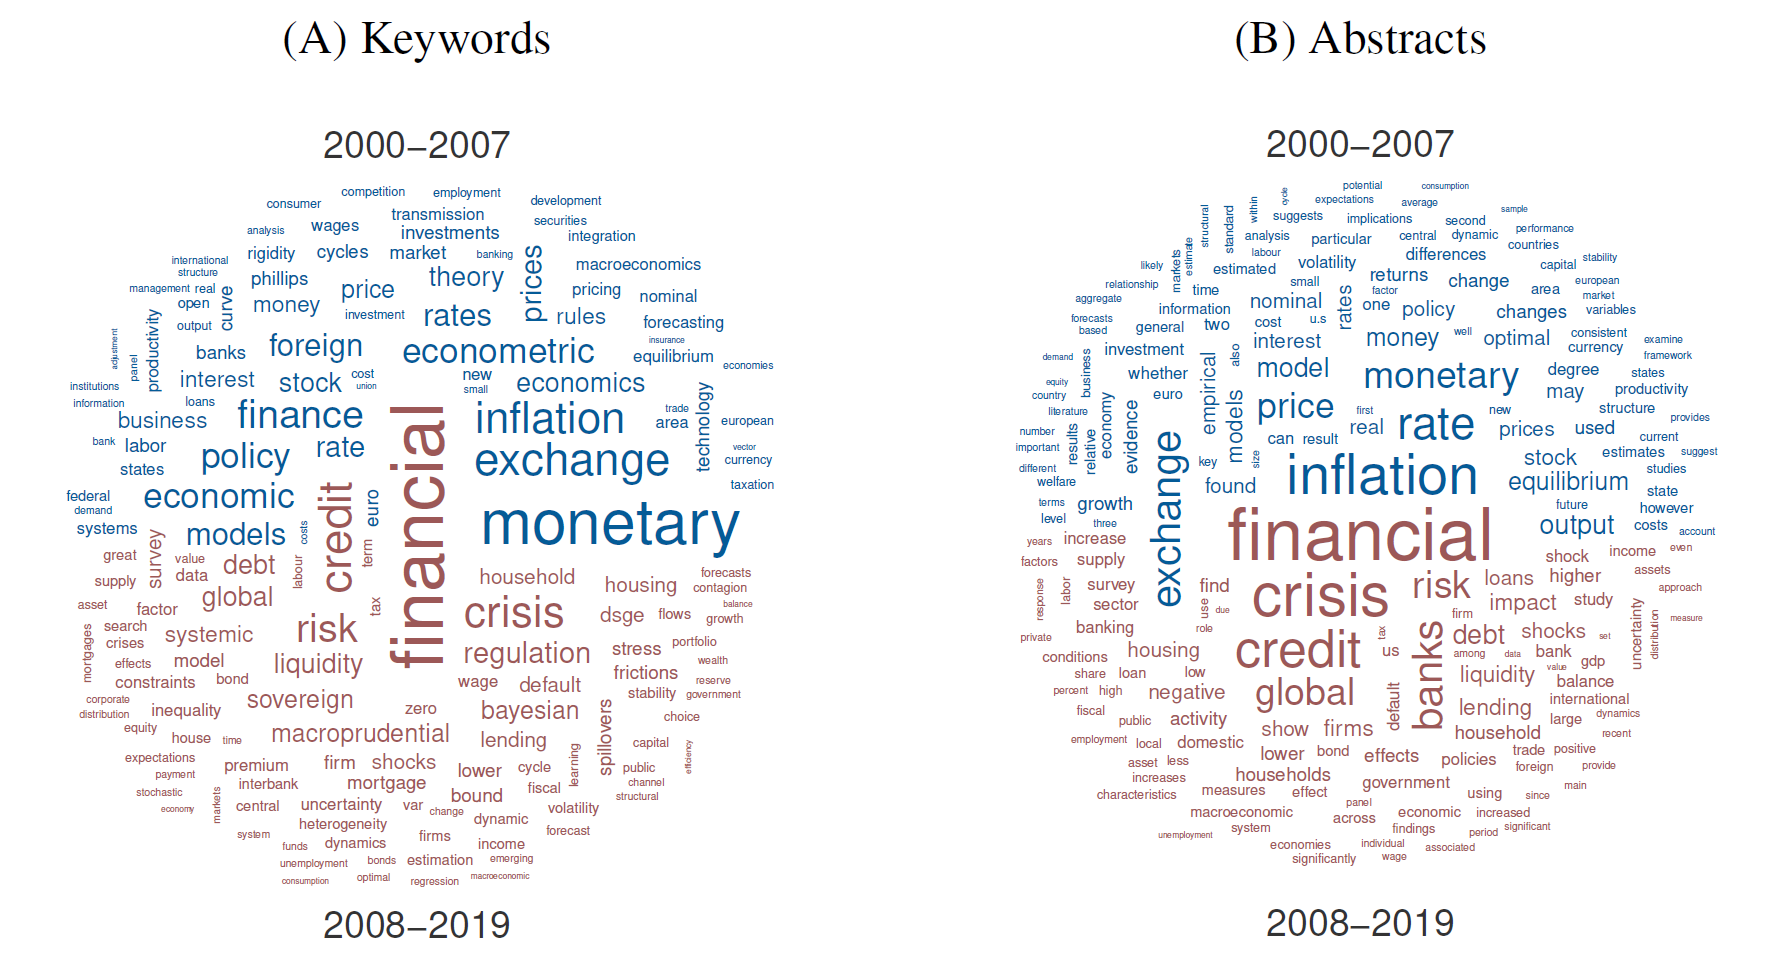 Word cloud before and after the GFC of 2008–2009